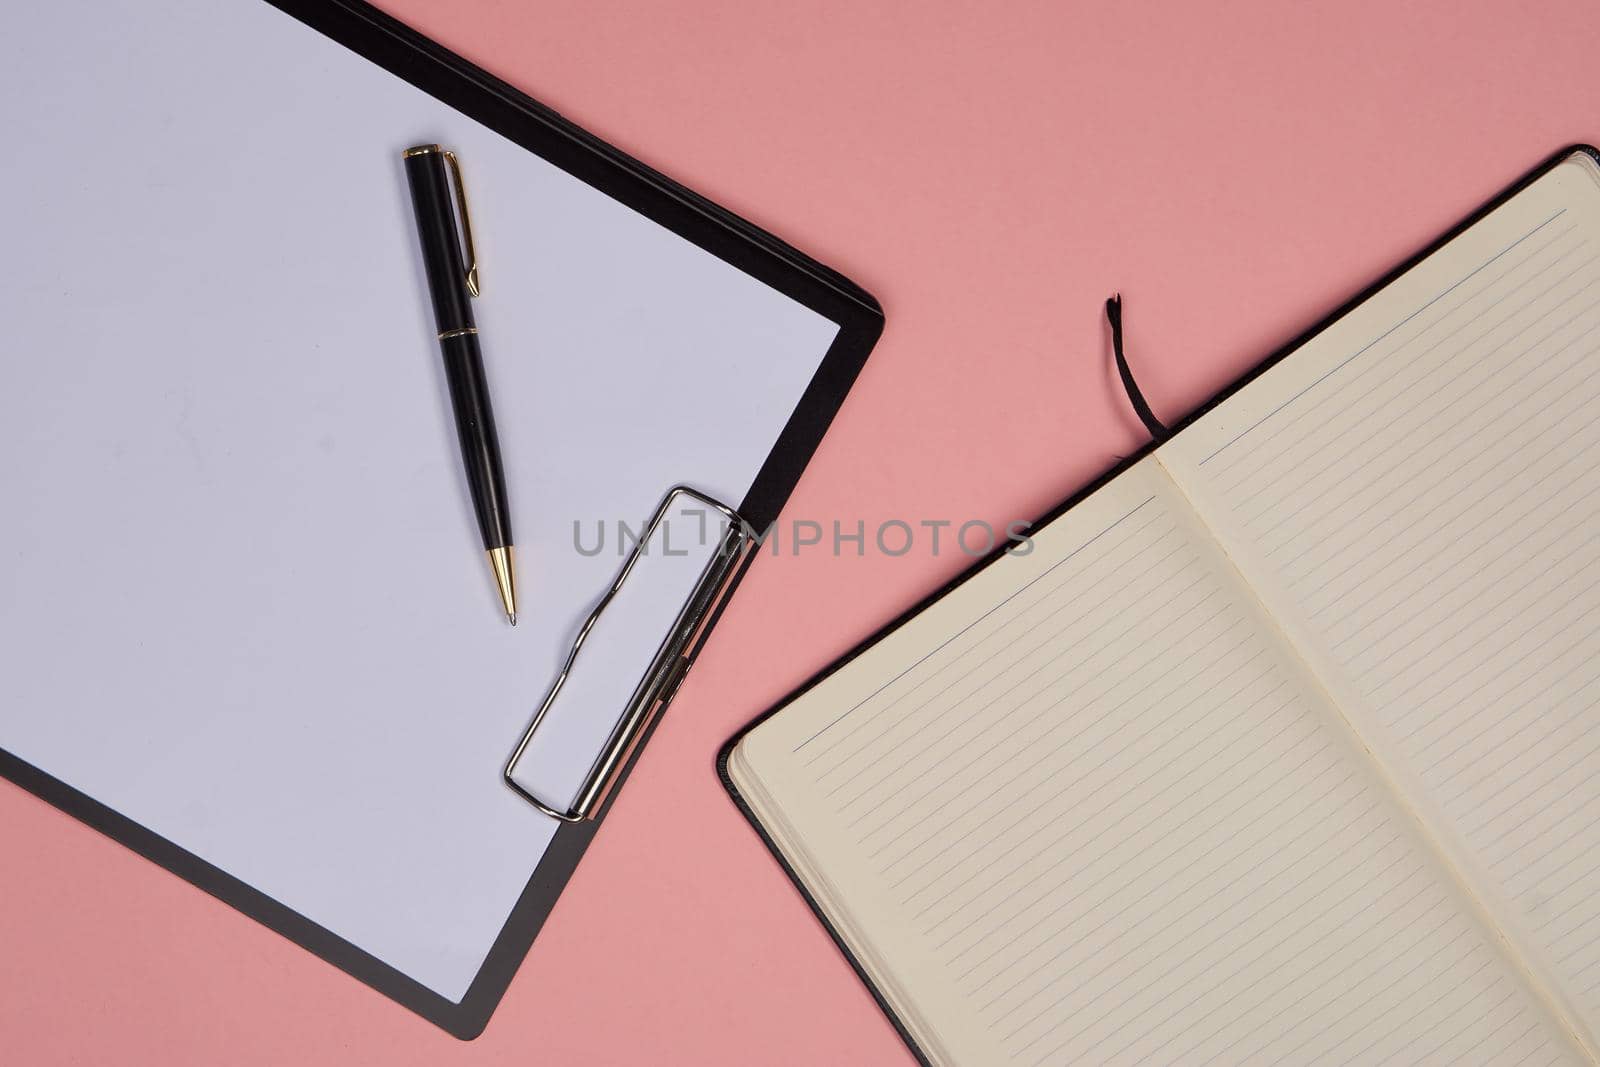 accessories office supplies notepad close-up business. High quality photo